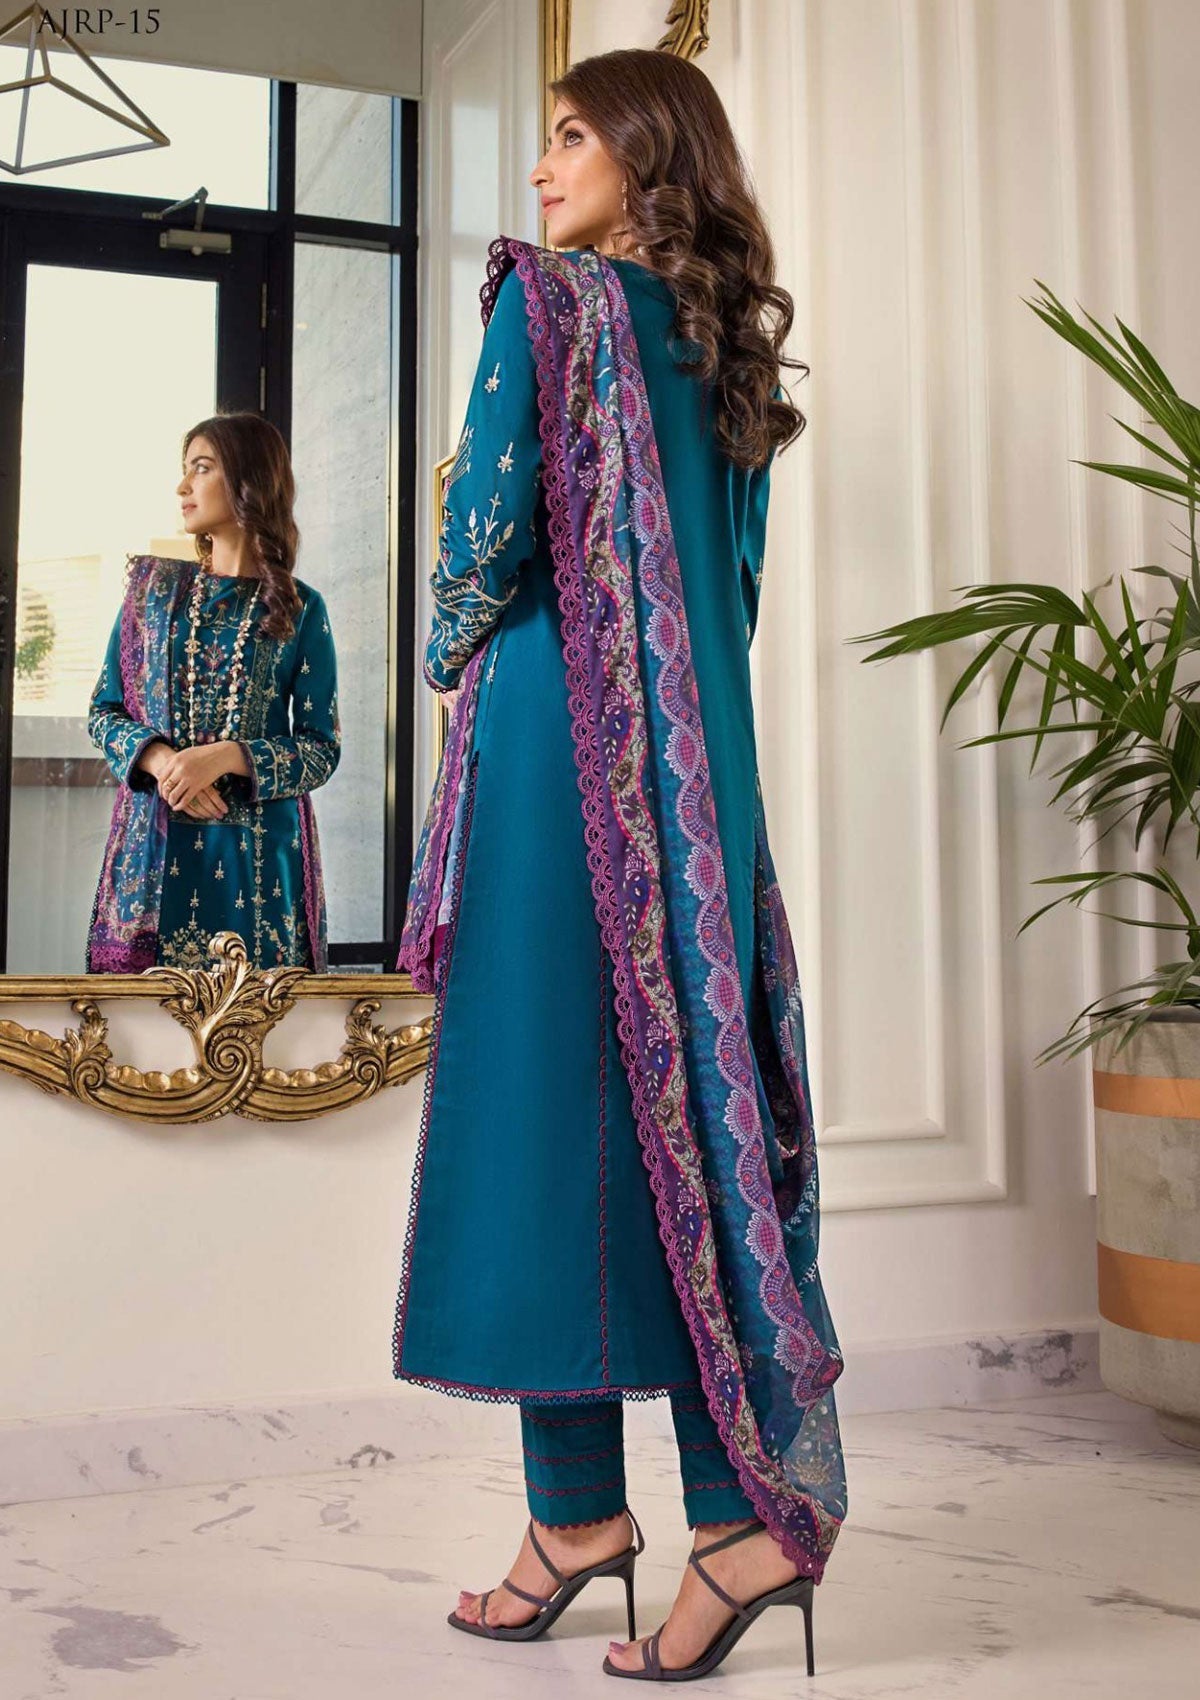 Lawn Collection - Asim Jofa - Rania - AJRP#15 available at Saleem Fabrics Traditions